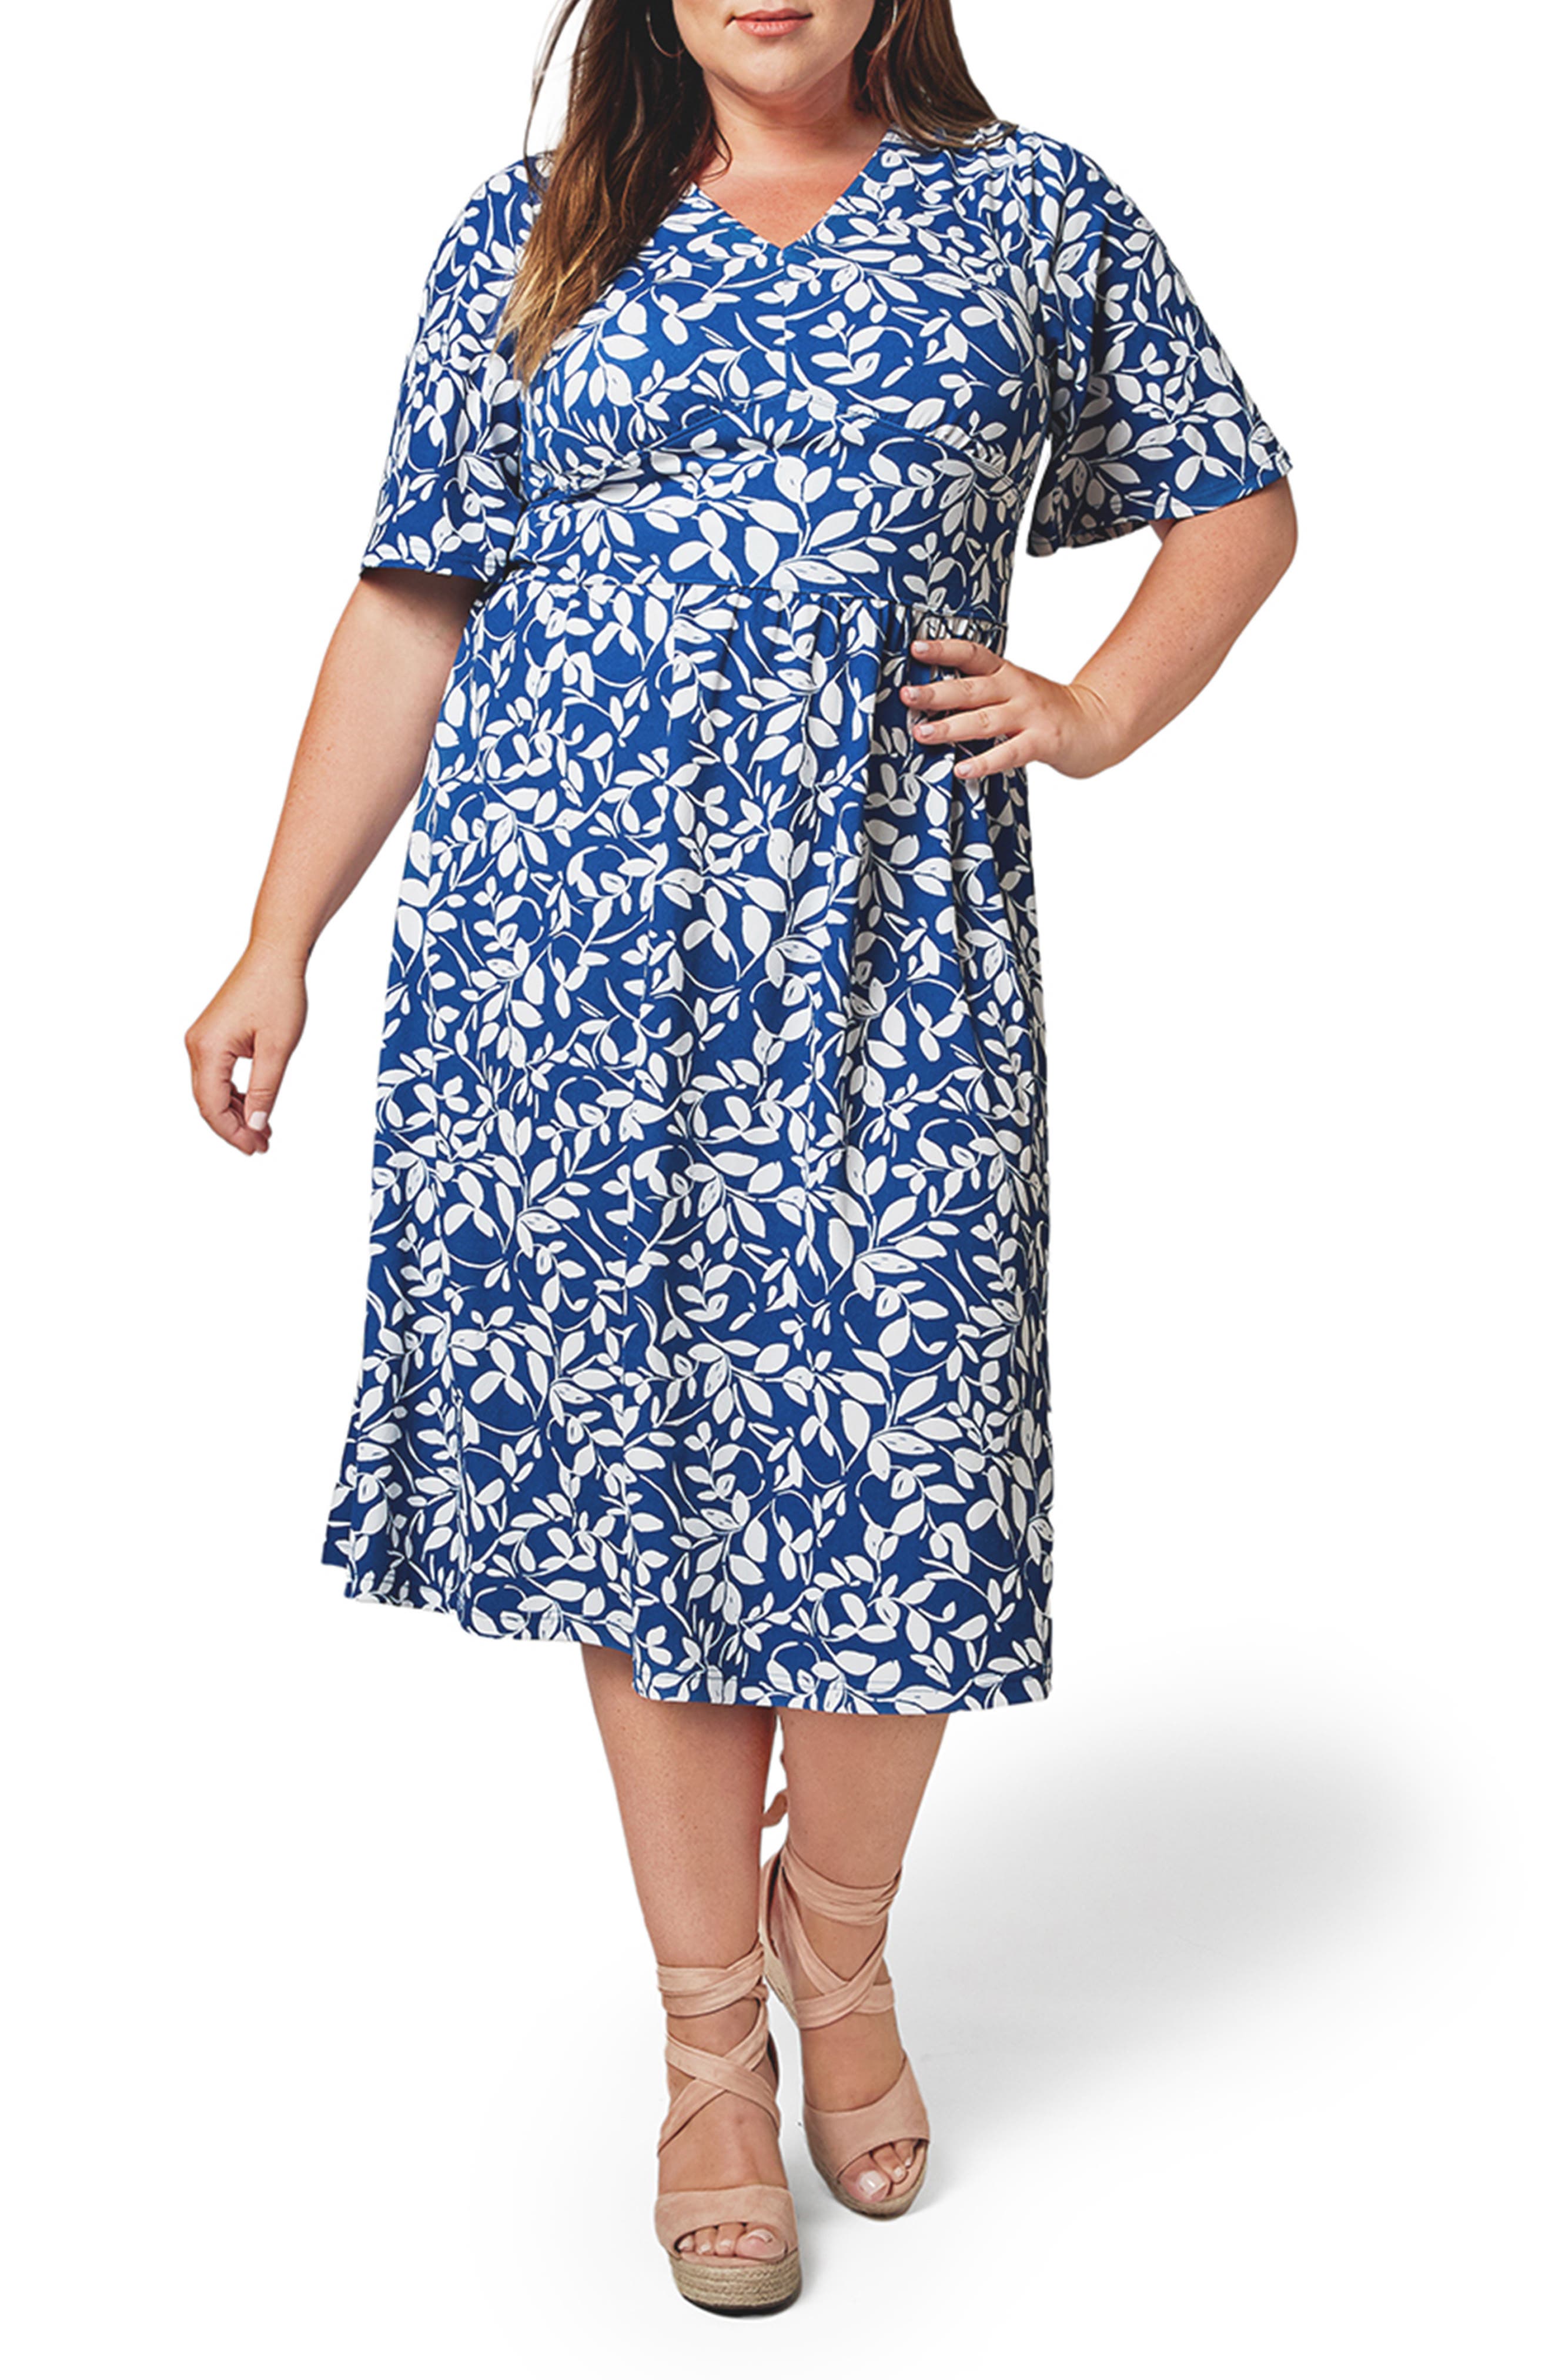 Leota Zoe Dress in Two Tone Floral Set Sail at Nordstrom